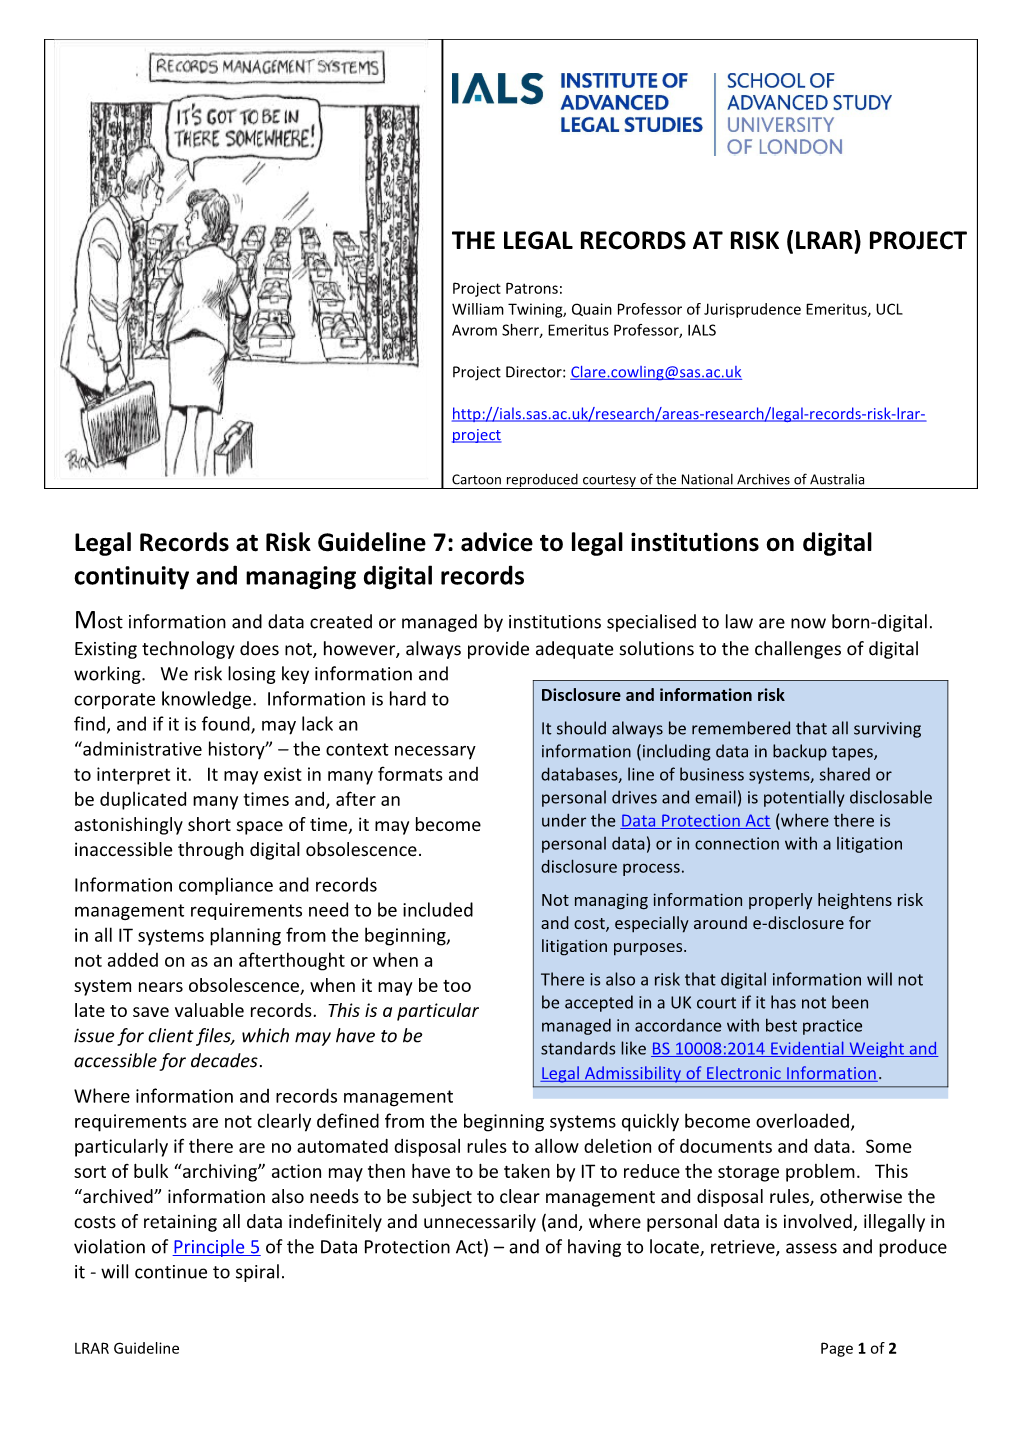 Legal Records at Risk Guideline 7: Advice to Legal Institutions on Digital Continuity